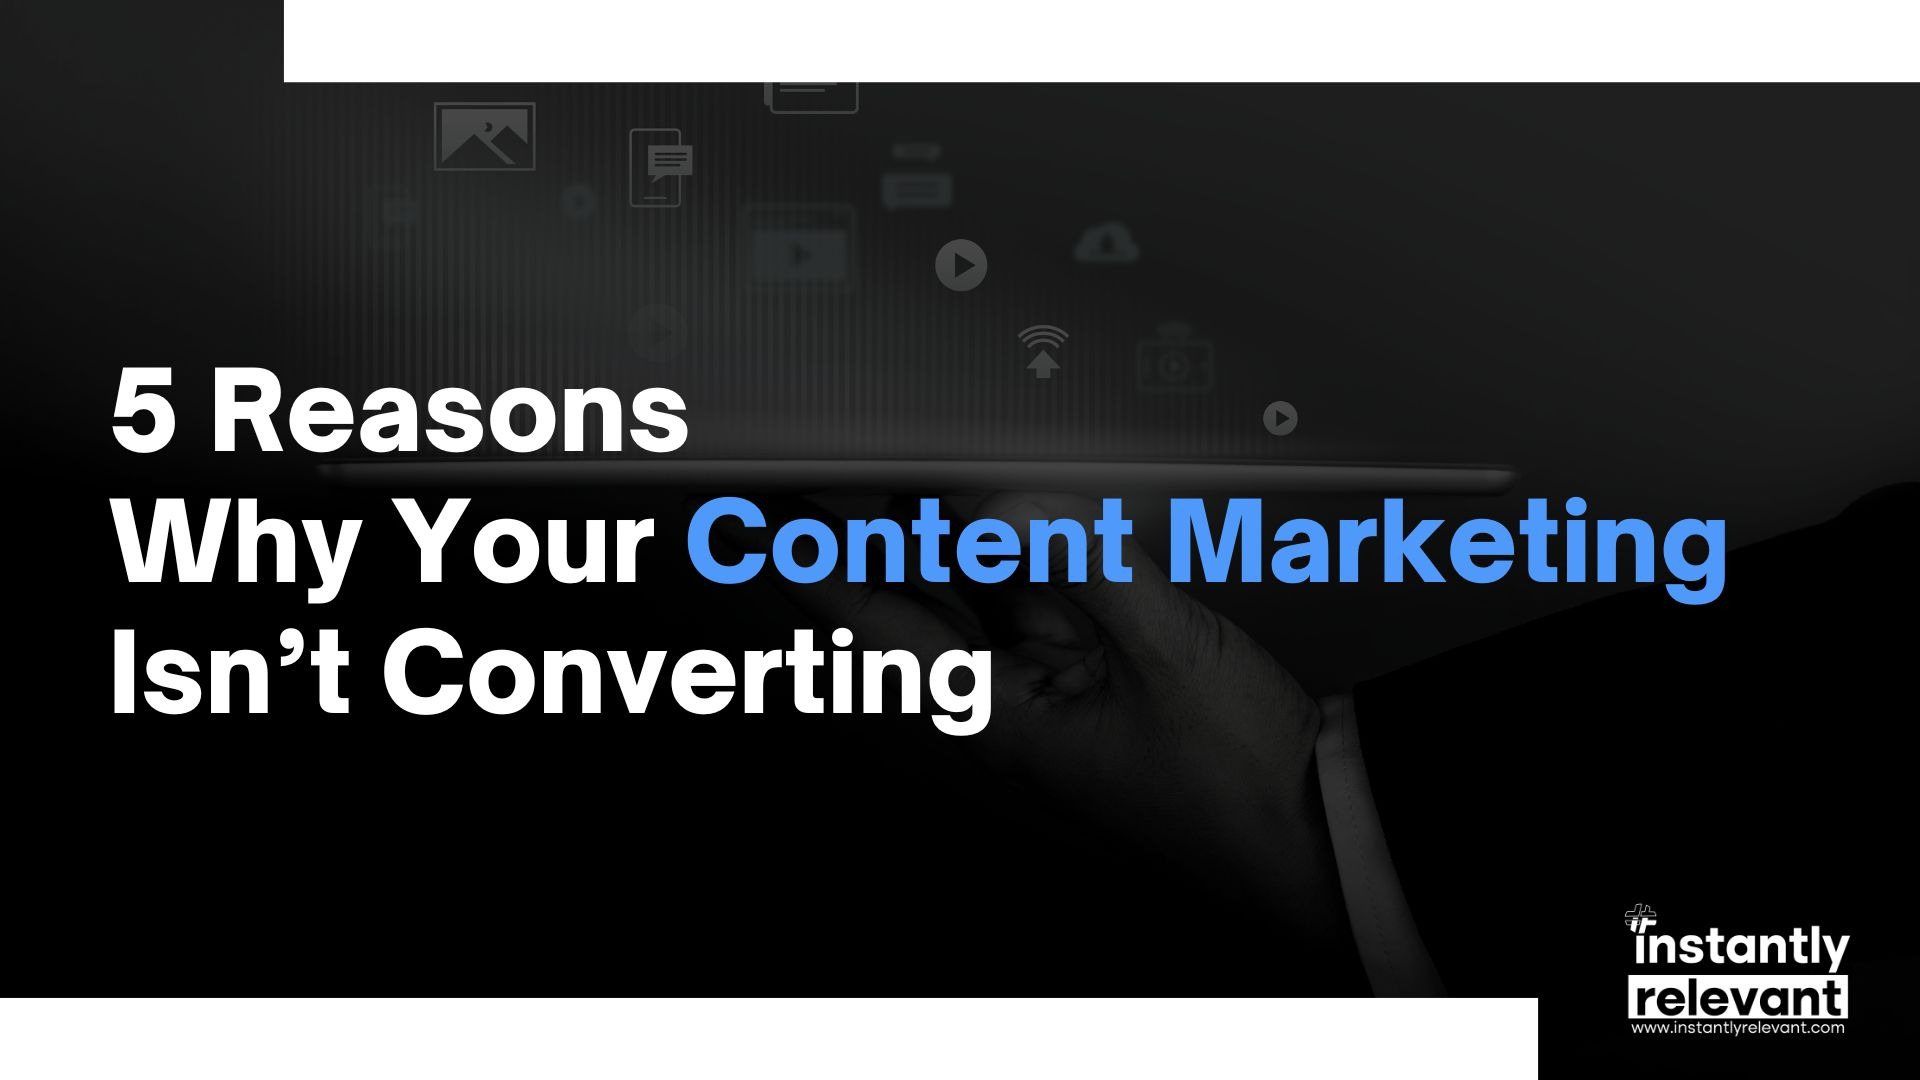 5 Reasons Why Your Content Marketing isn’t Converting